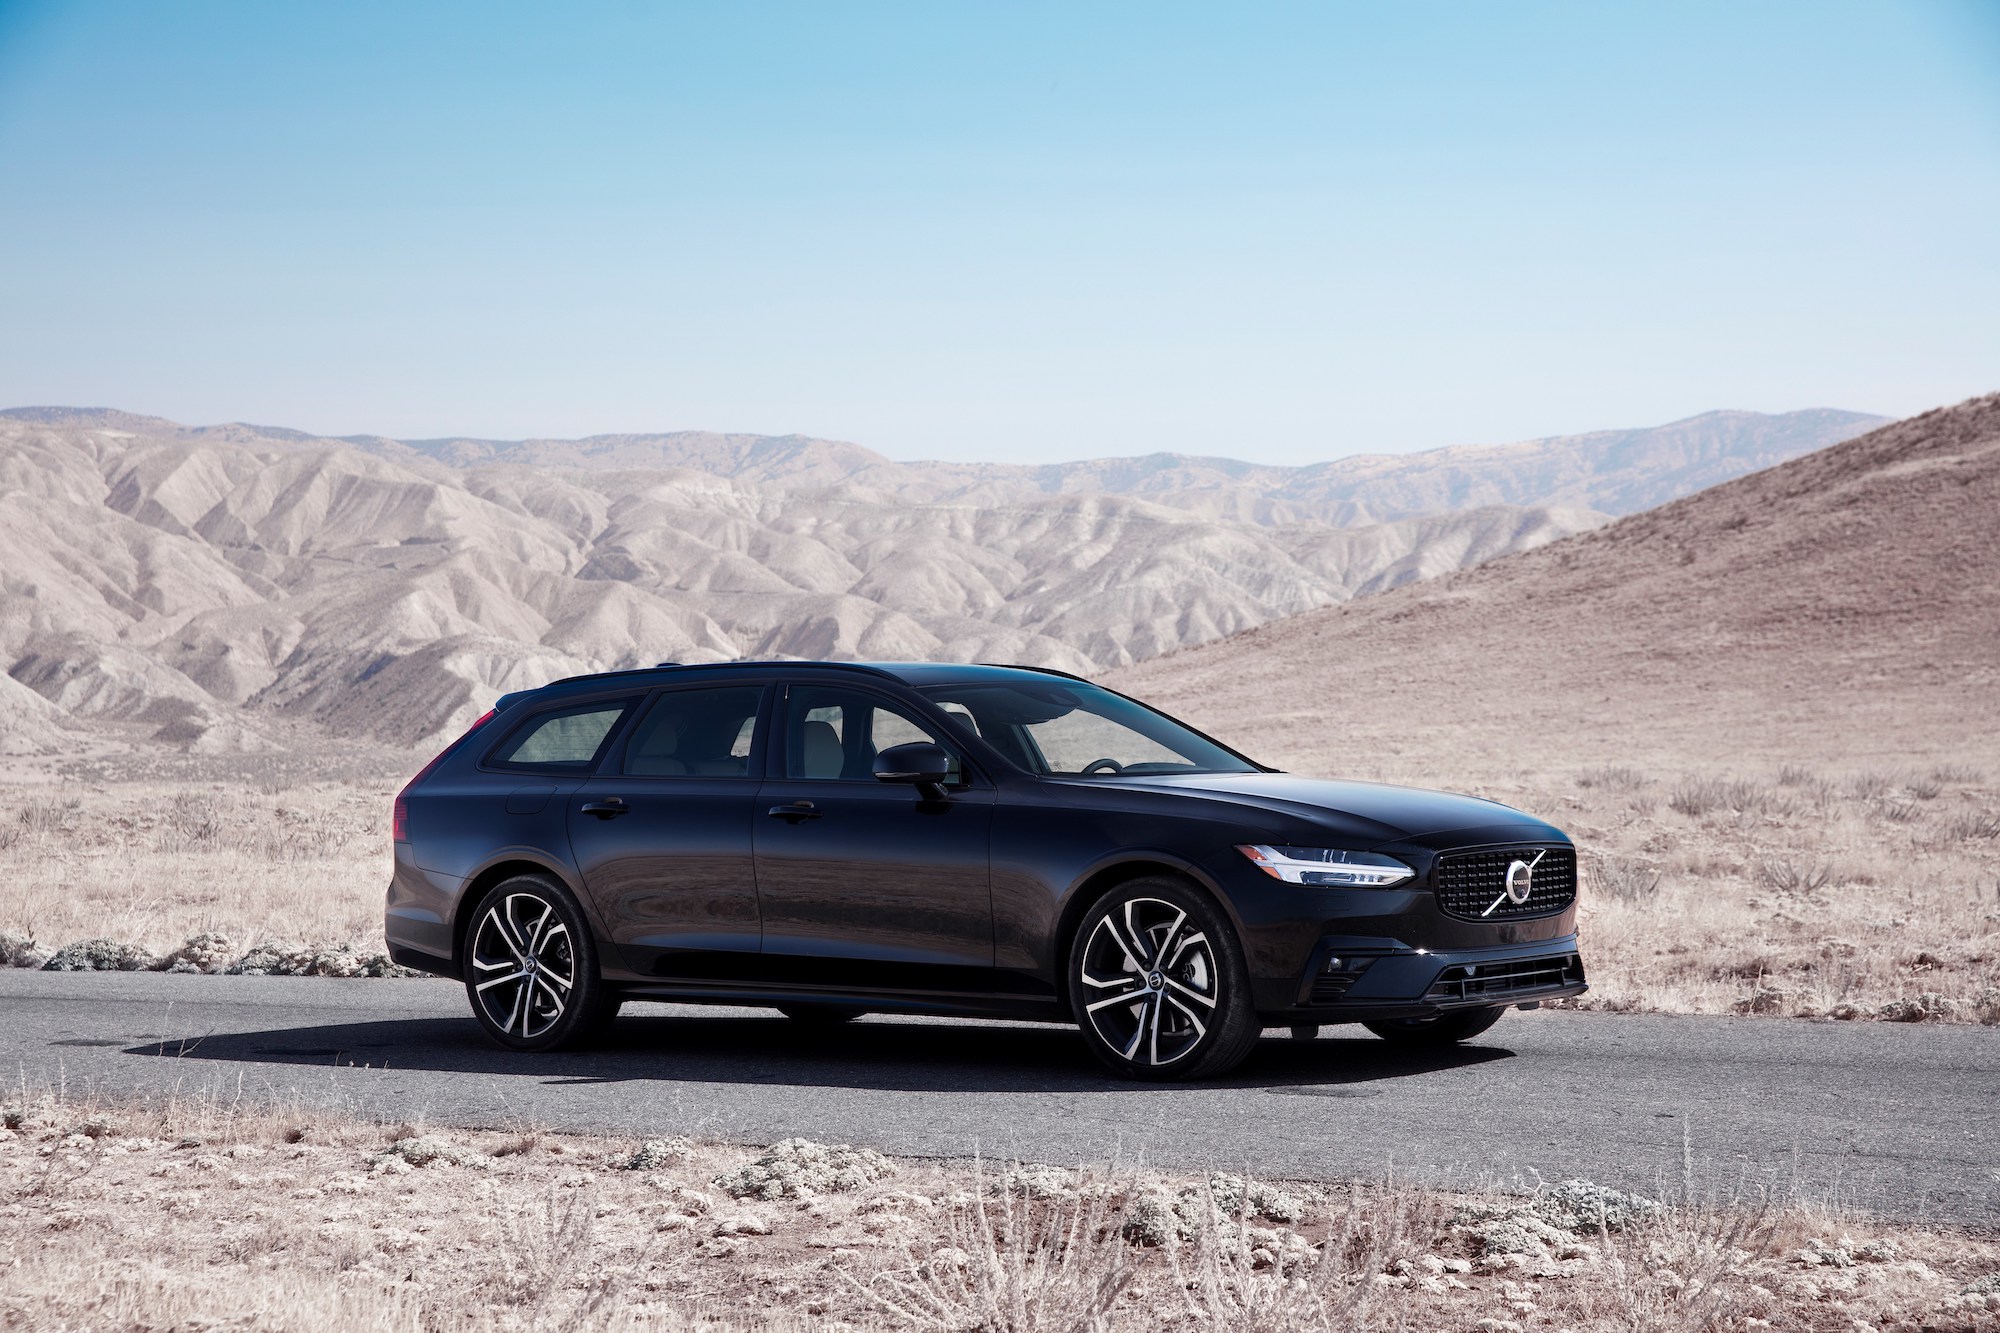 A black 2021 Volvo V90 station wagon parked on paved road through desert mountains